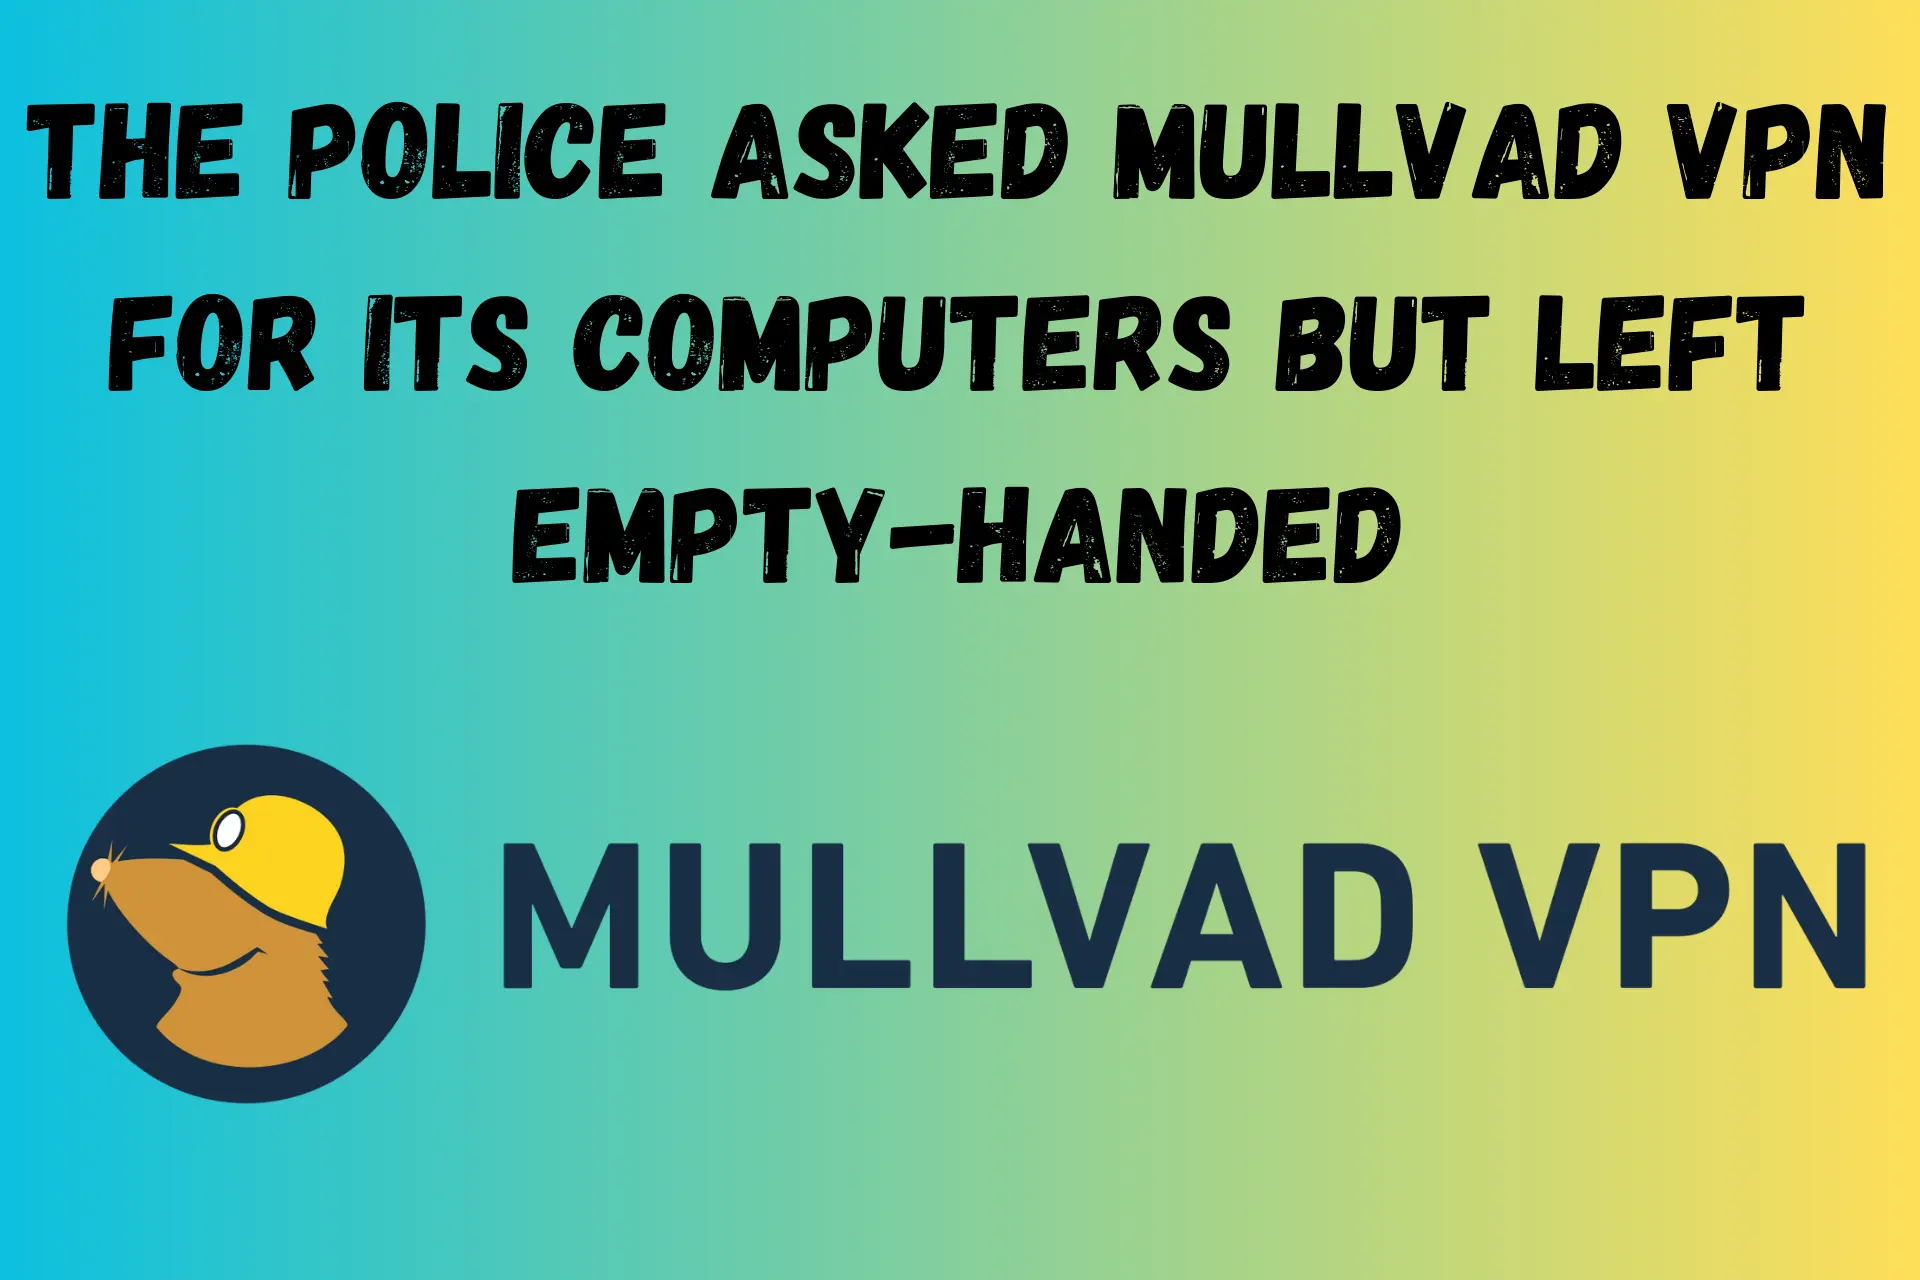 The Police Asked Mullvad VPN for Its Computers but Left Empty-Handed